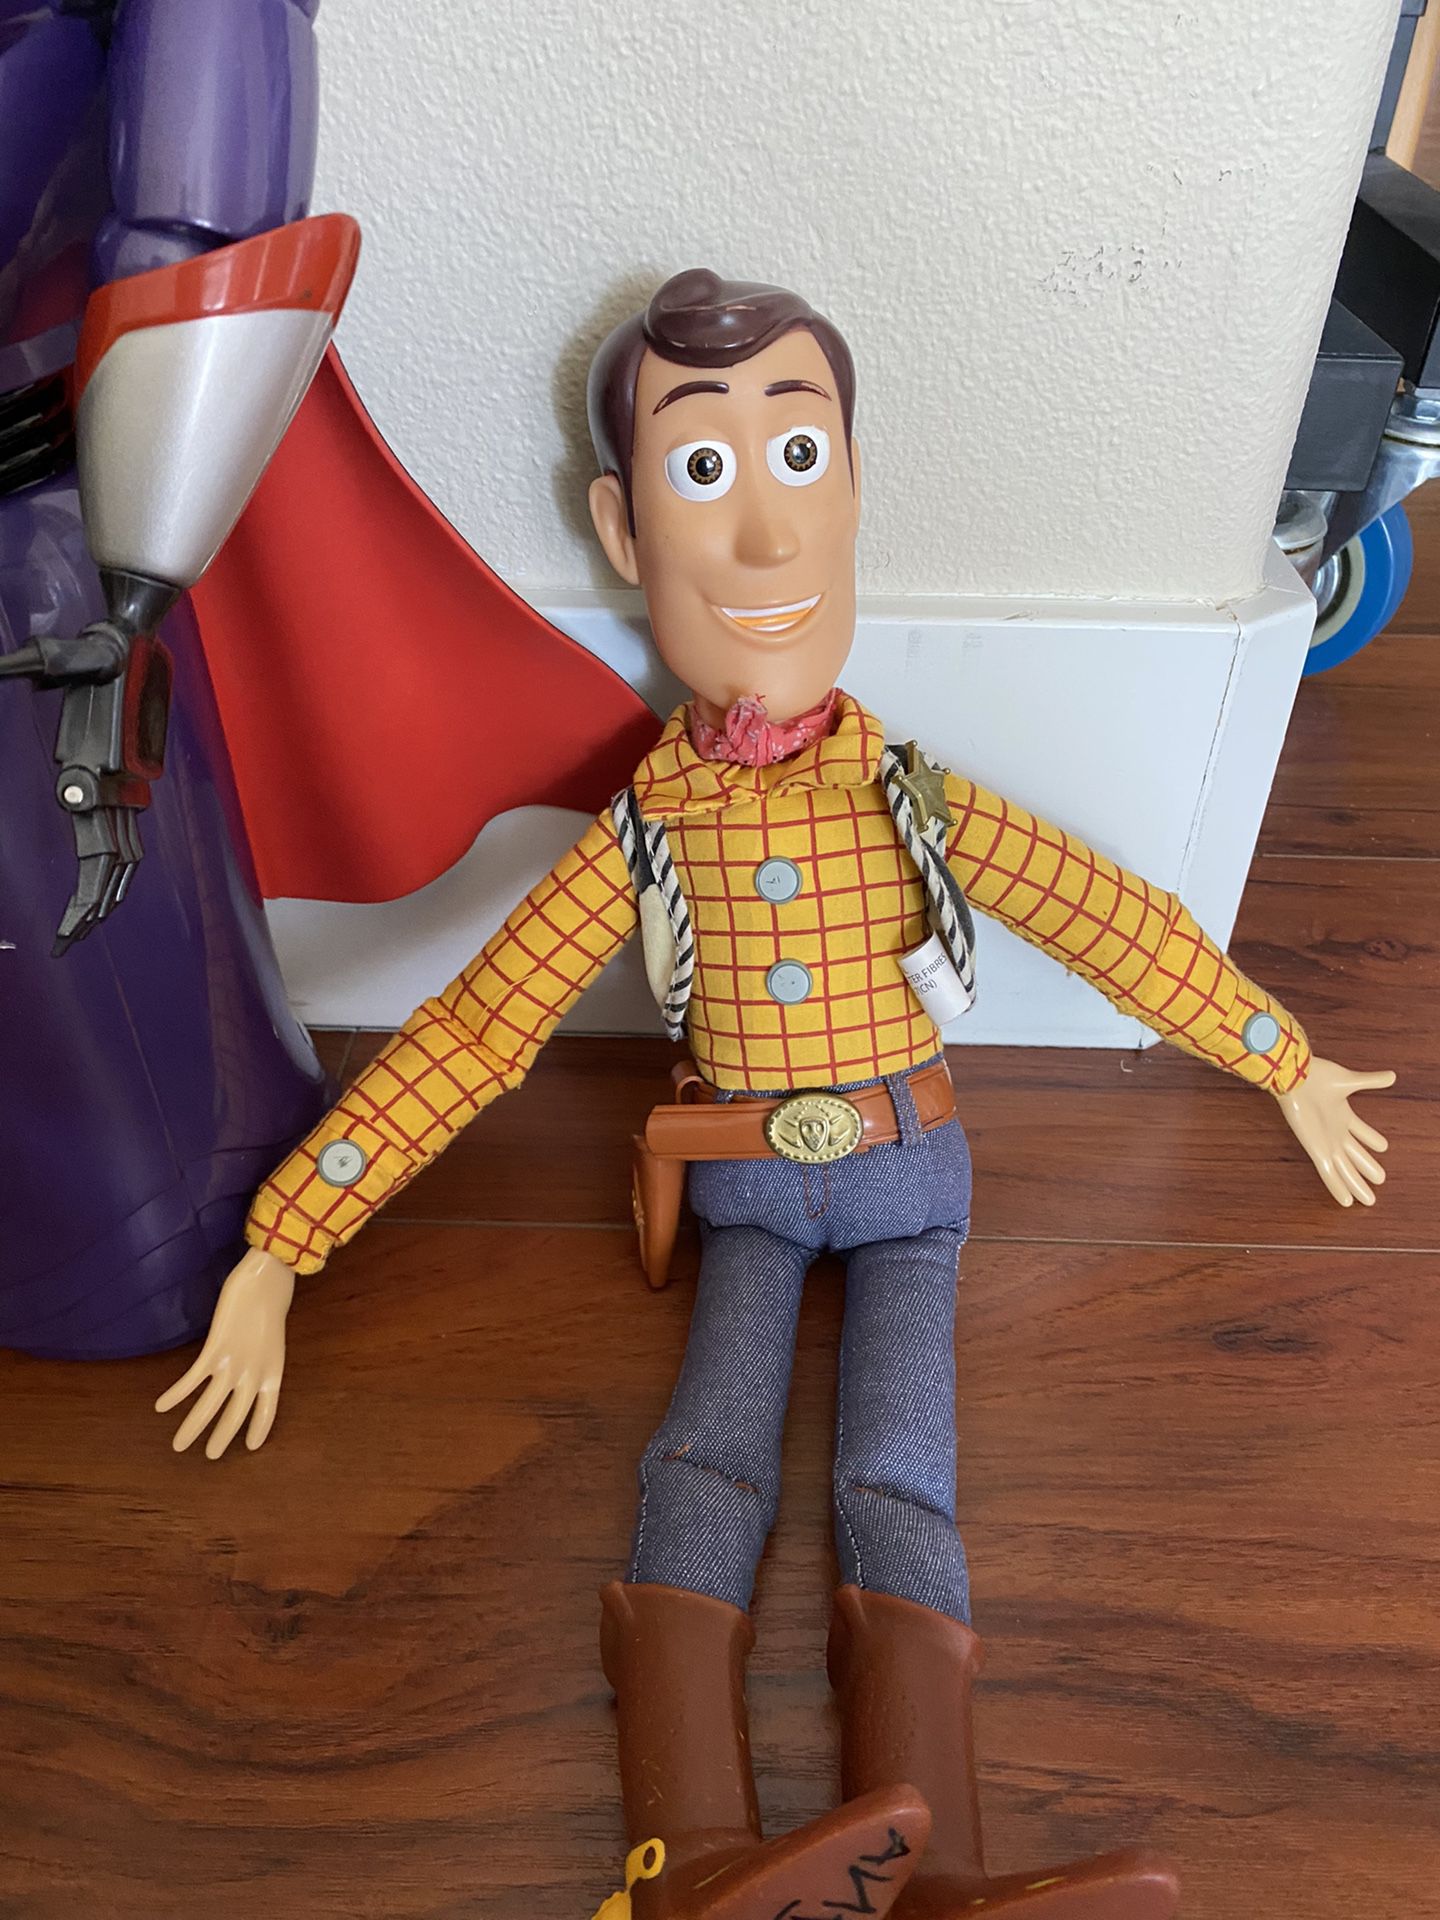 Toy Story Talking Characters Big Size Toys Woody, Buzz lightings , Zorg 